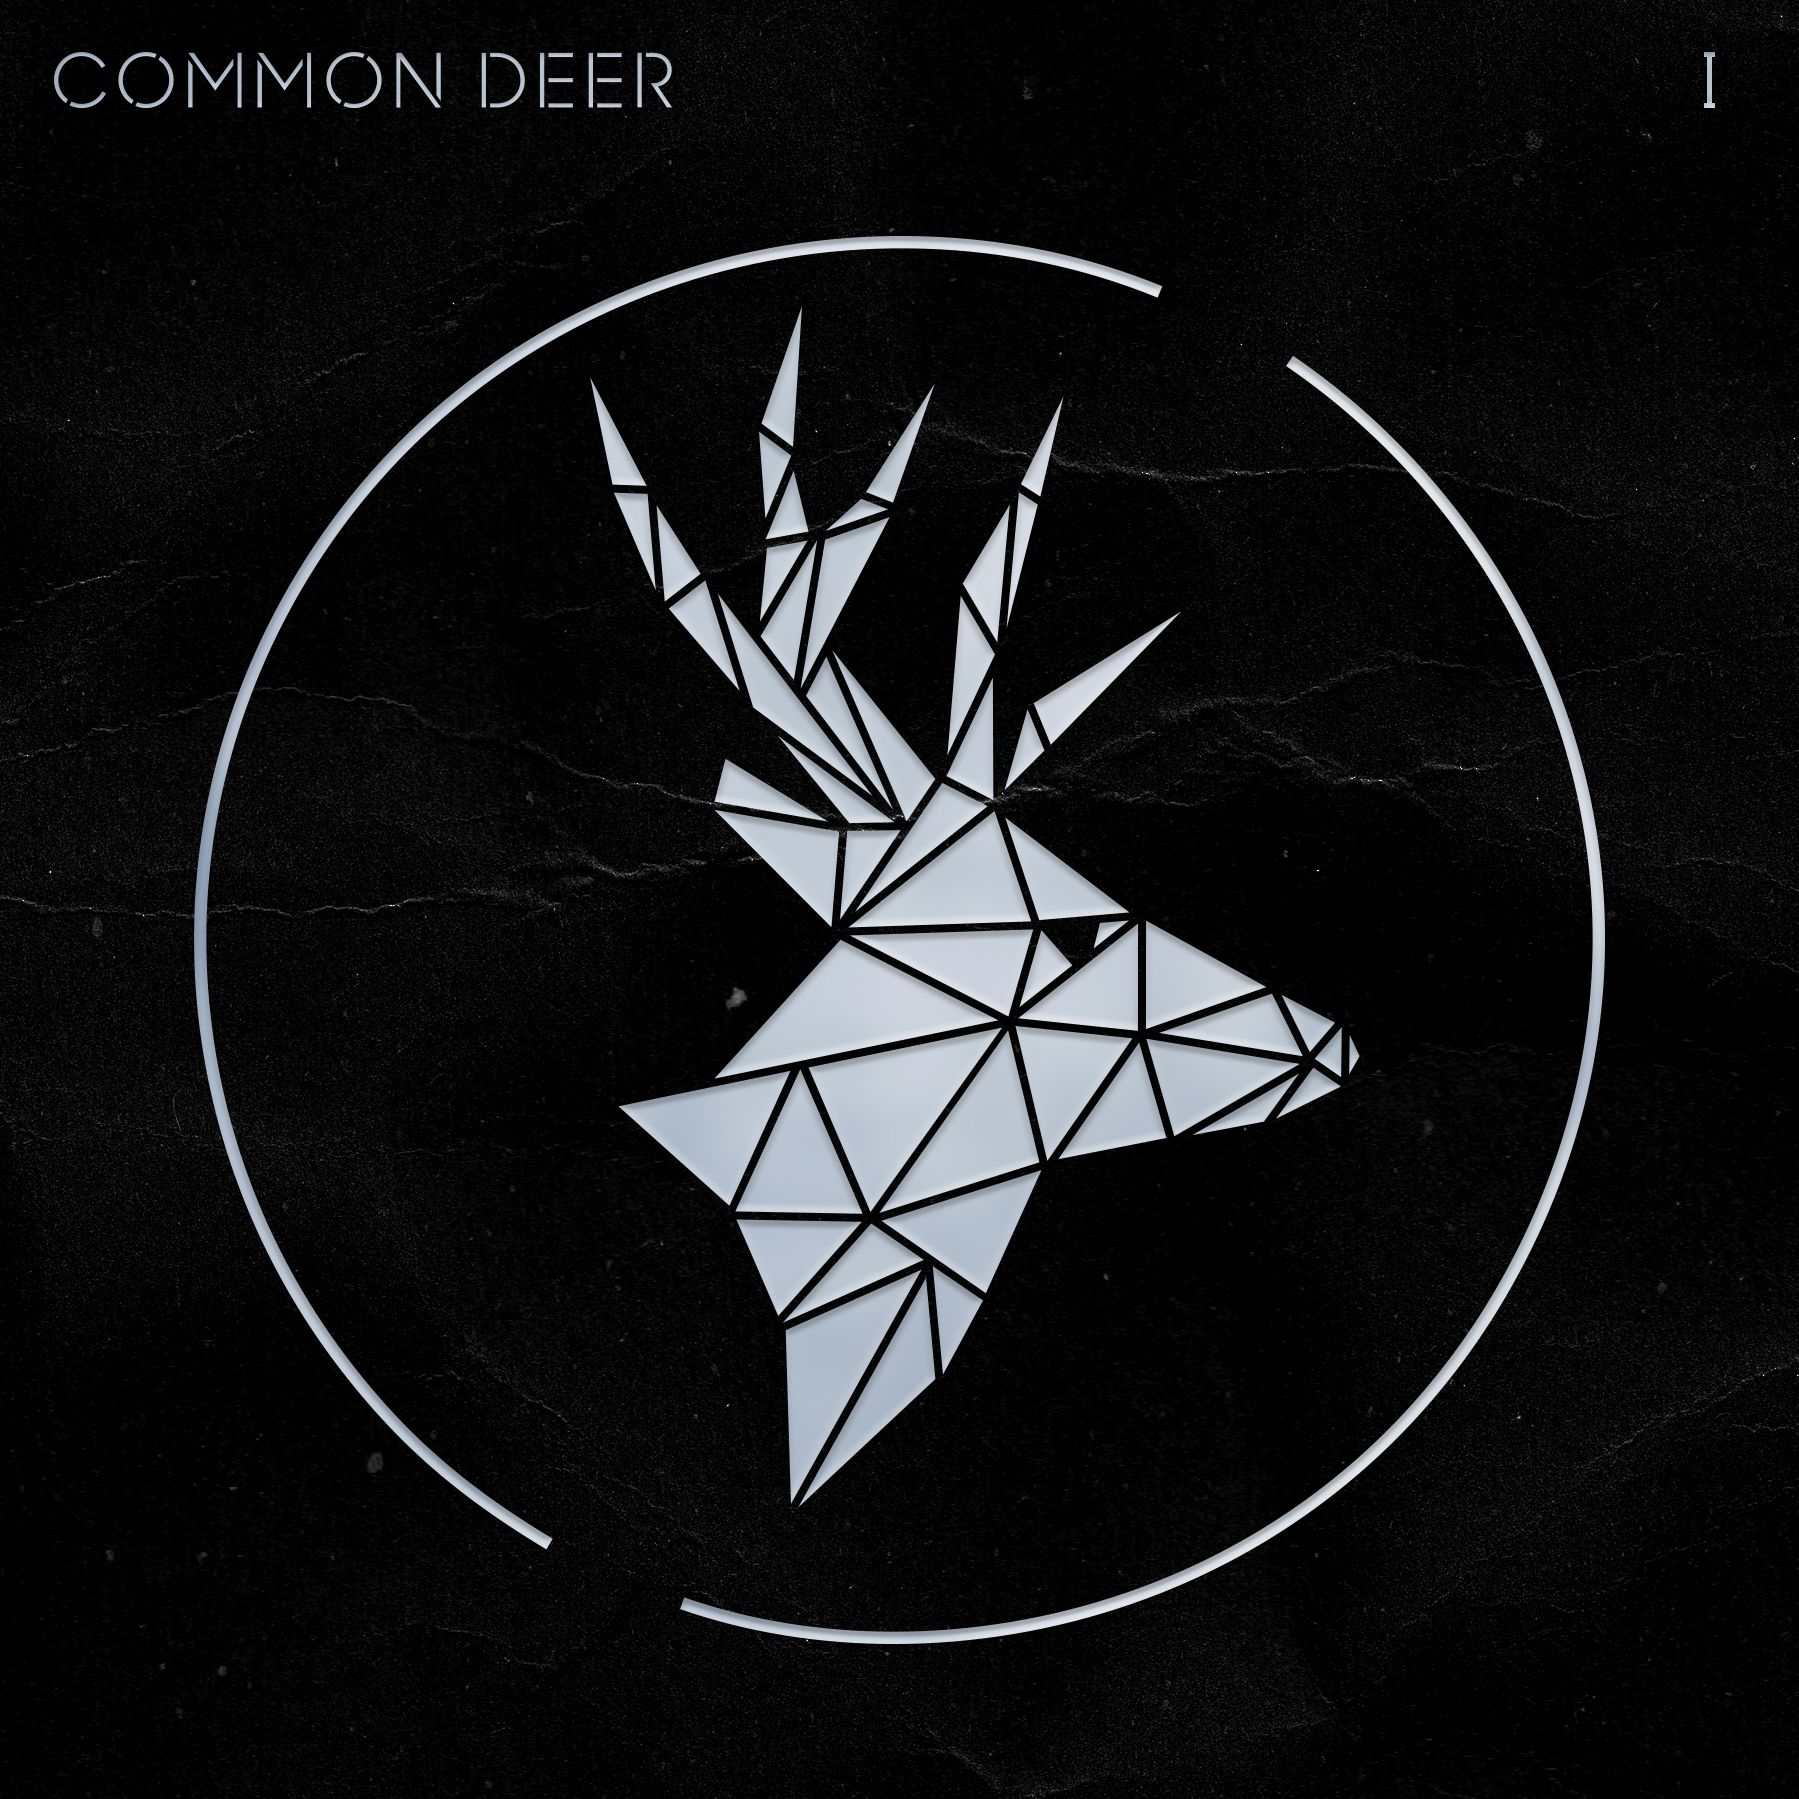 Common Deer – “Confession (I Should Have Known)”